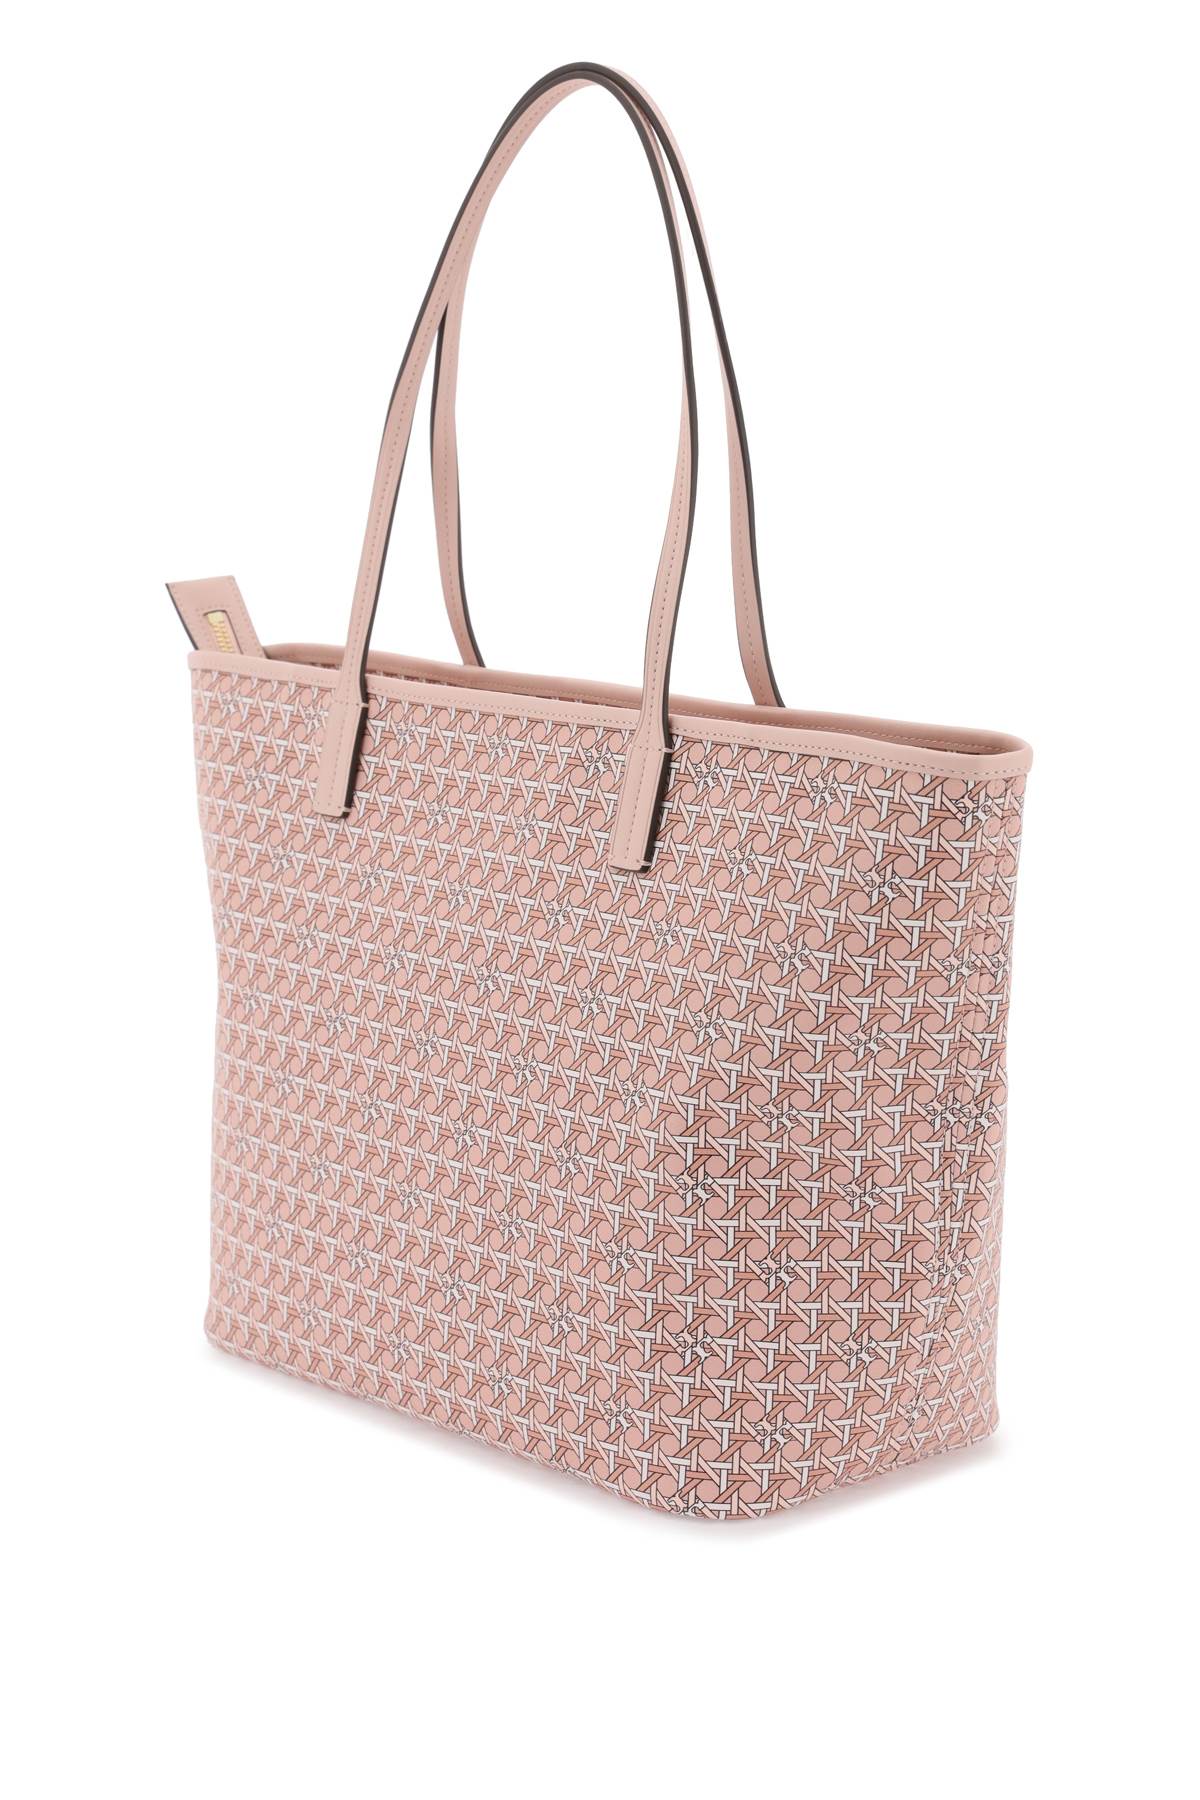 Shop Tory Burch Ever-ready Shopping Bag In Winter Peach (pink)